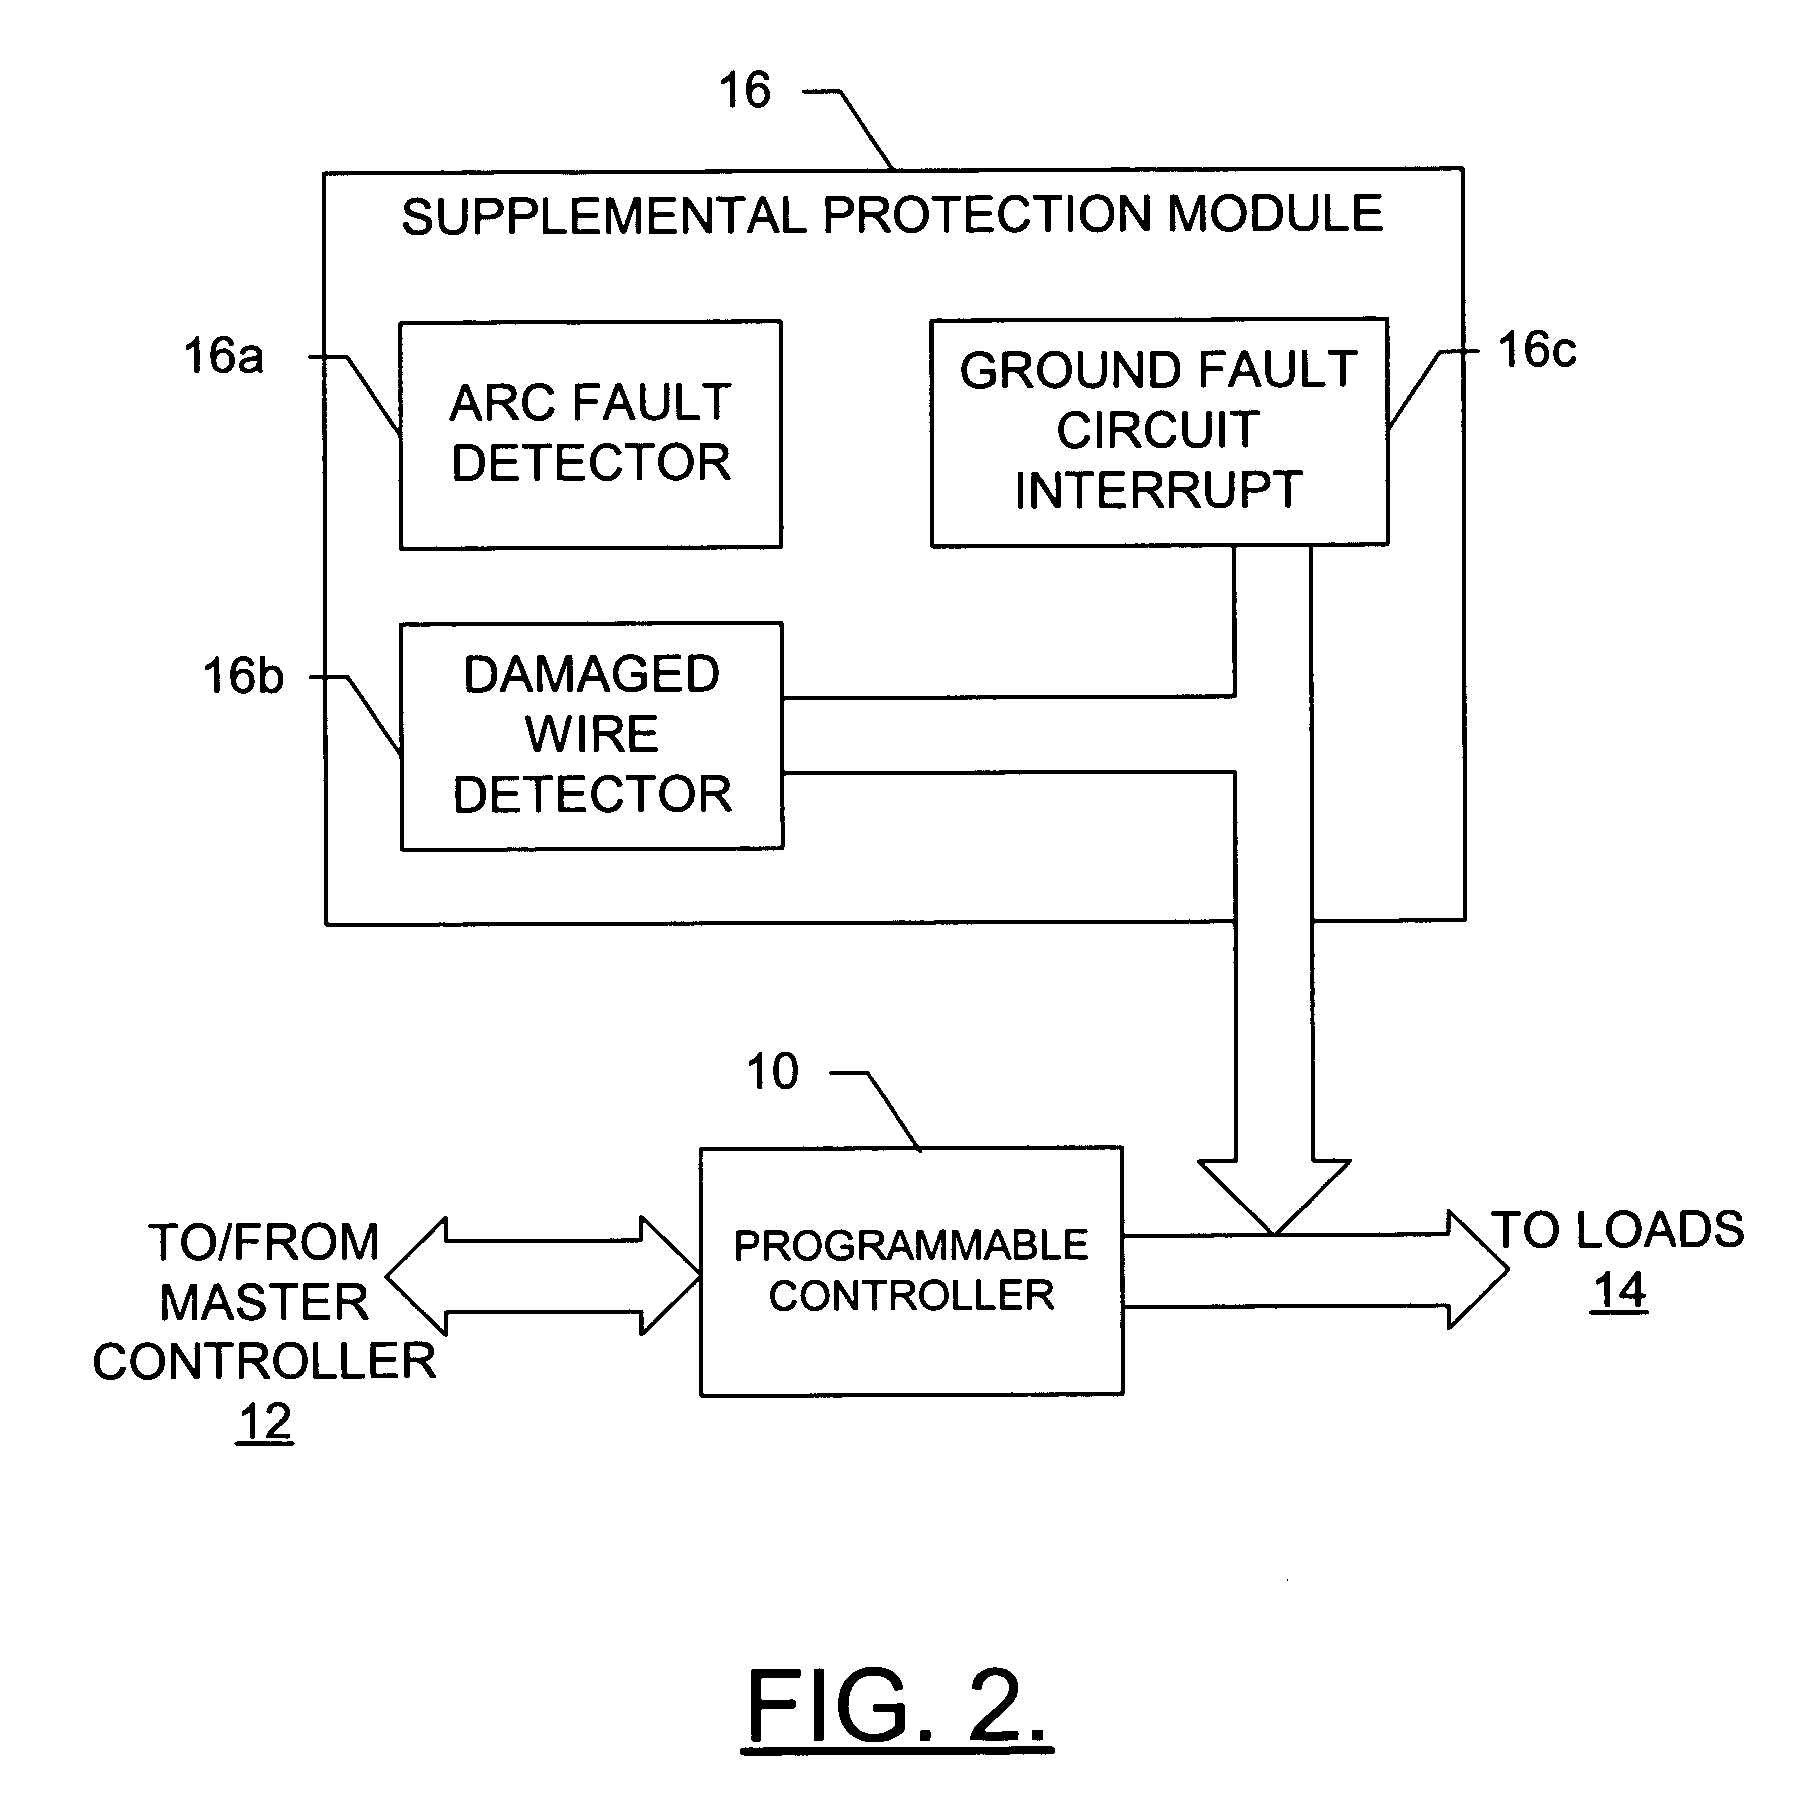 System and method for remotely detecting and locating faults in a power system